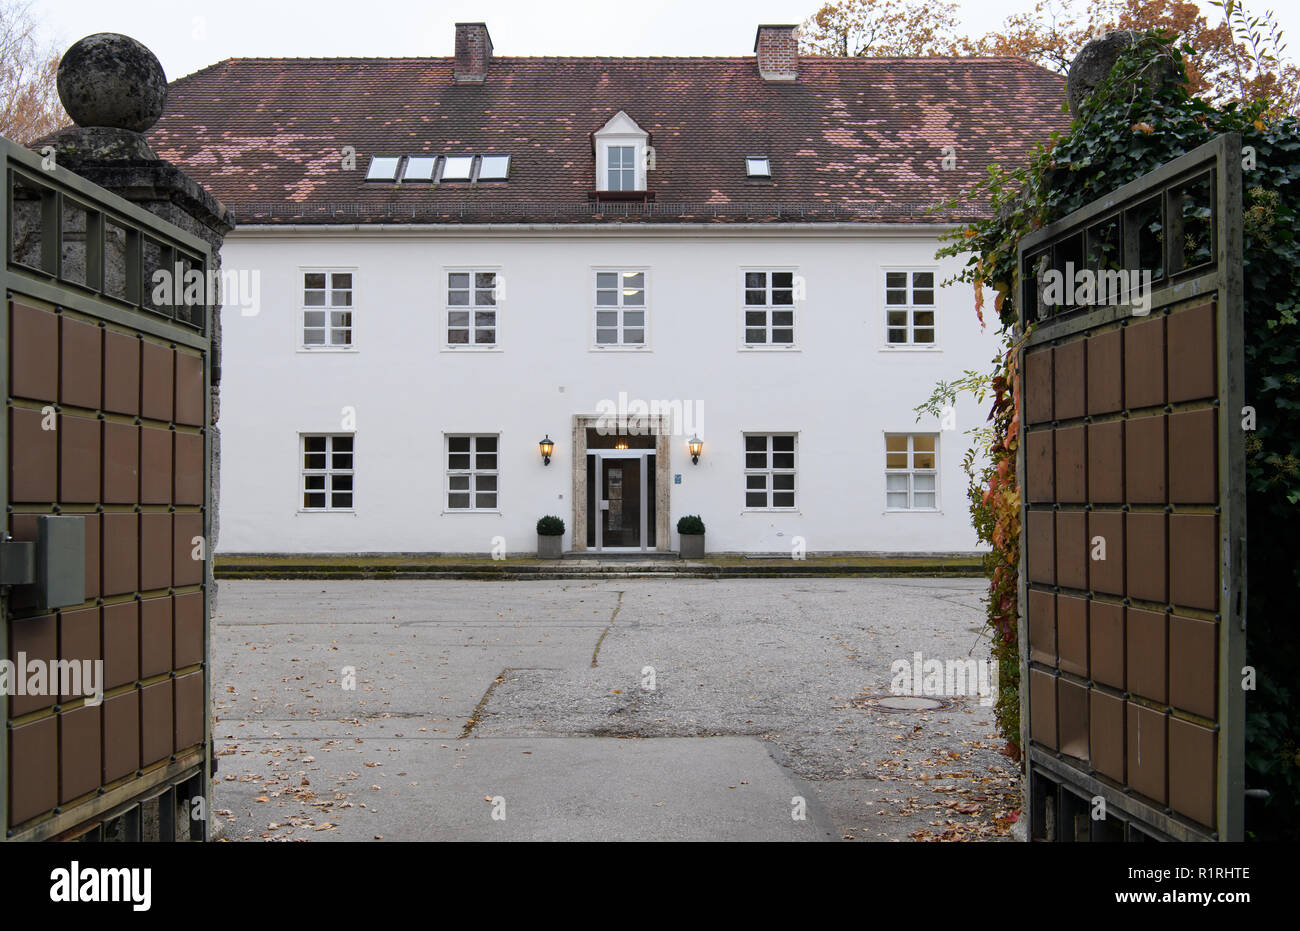 Pullach, Germany. 09th Nov, 2018. The president's villa can be seen on the premises of the Federal Intelligence Service (BND). The villa was once the residence of Martin Bormann, head of the party office of the NSDAP and a confidant of Hitler, and belonged to the former Reichssiedlung Rudolf Heß, which was built between 1936 and 1938. From 1947, the buildings were used by the Gehlen organization and later by the Federal Intelligence Service (BND). Credit: Sven Hoppe/dpa/Alamy Live News Stock Photo